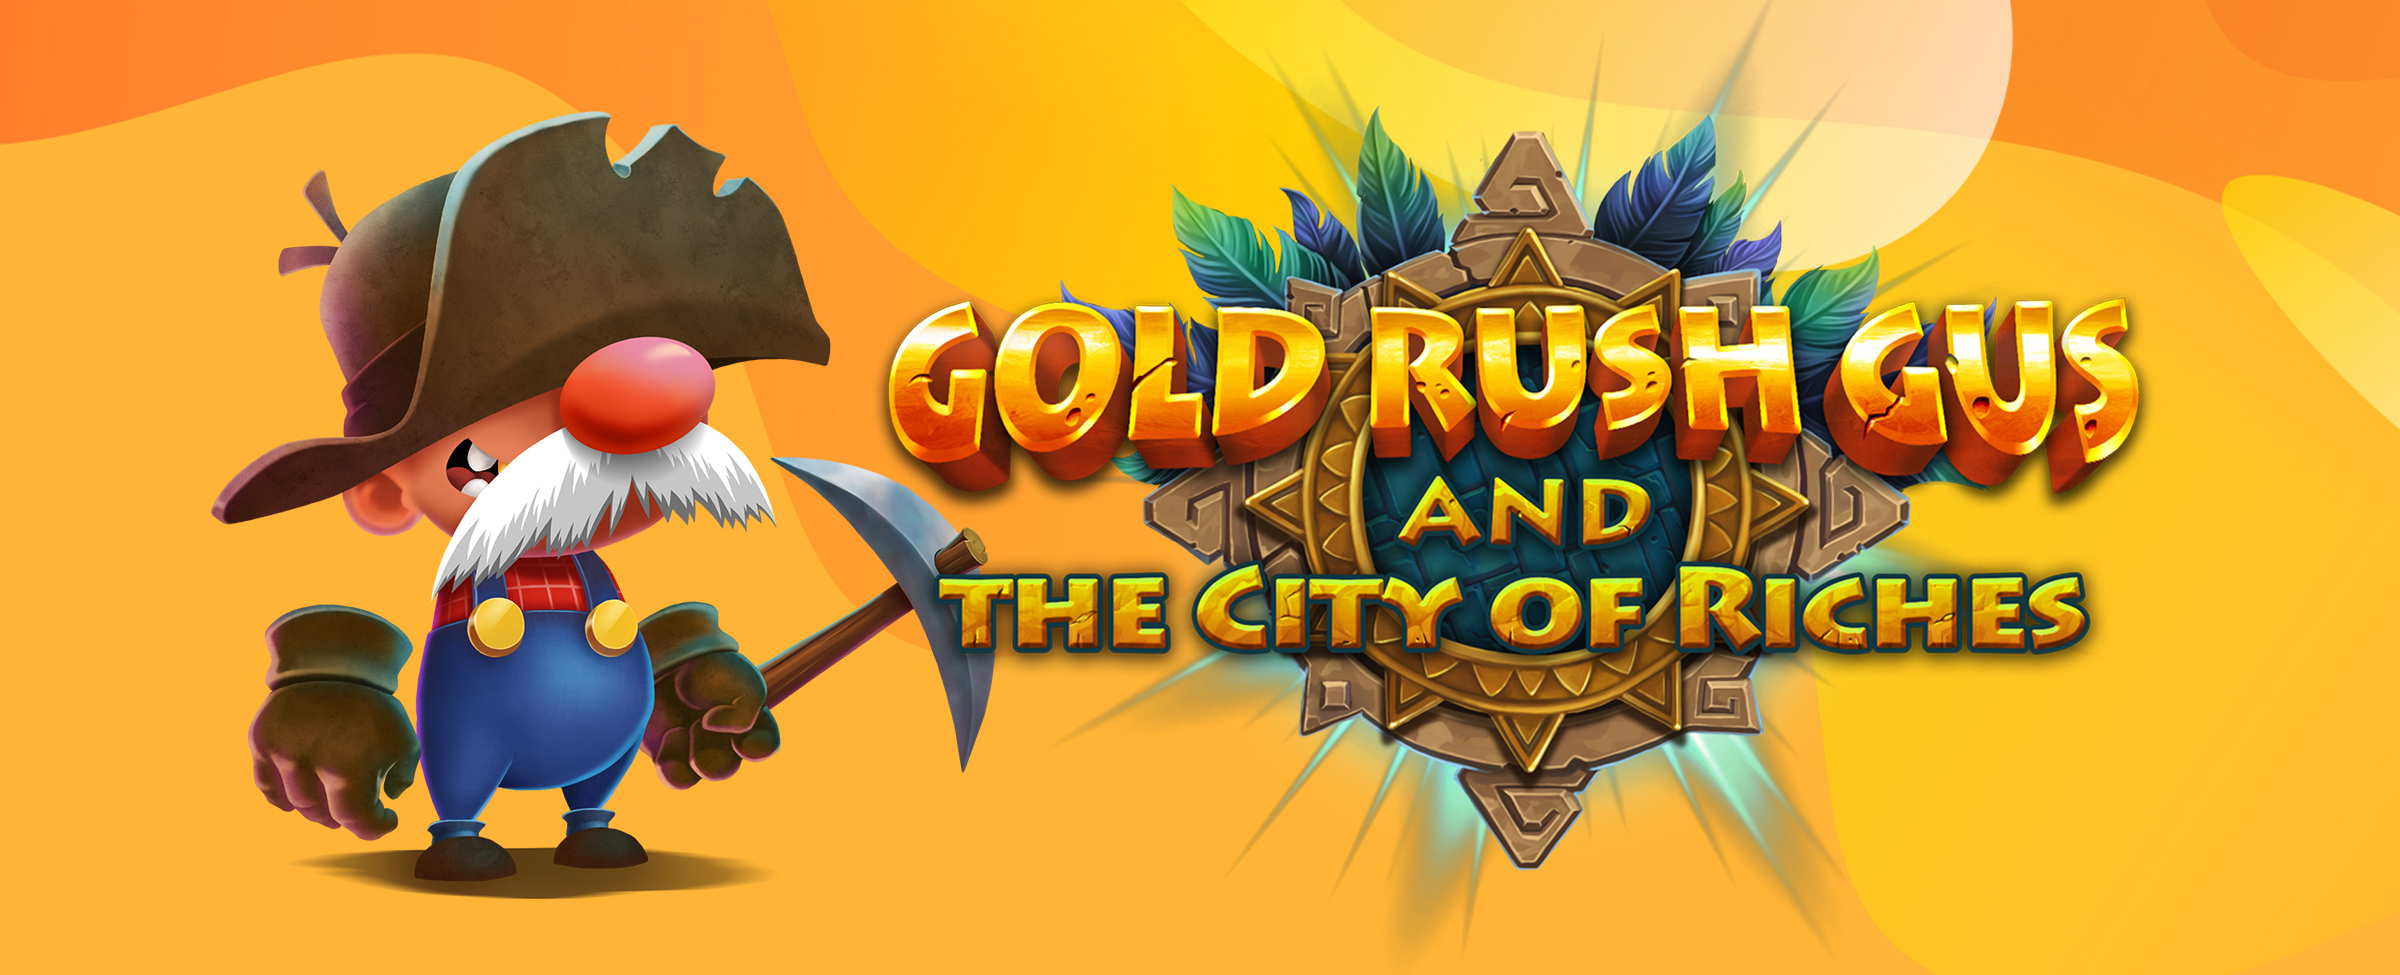 Welcome to the latest evolution in this game from our adventure-seeking, gold-digging friend Gus! It’s called Gold Rush Gush and the City of Riches, and we’ve reviewed it right here. Dig it!